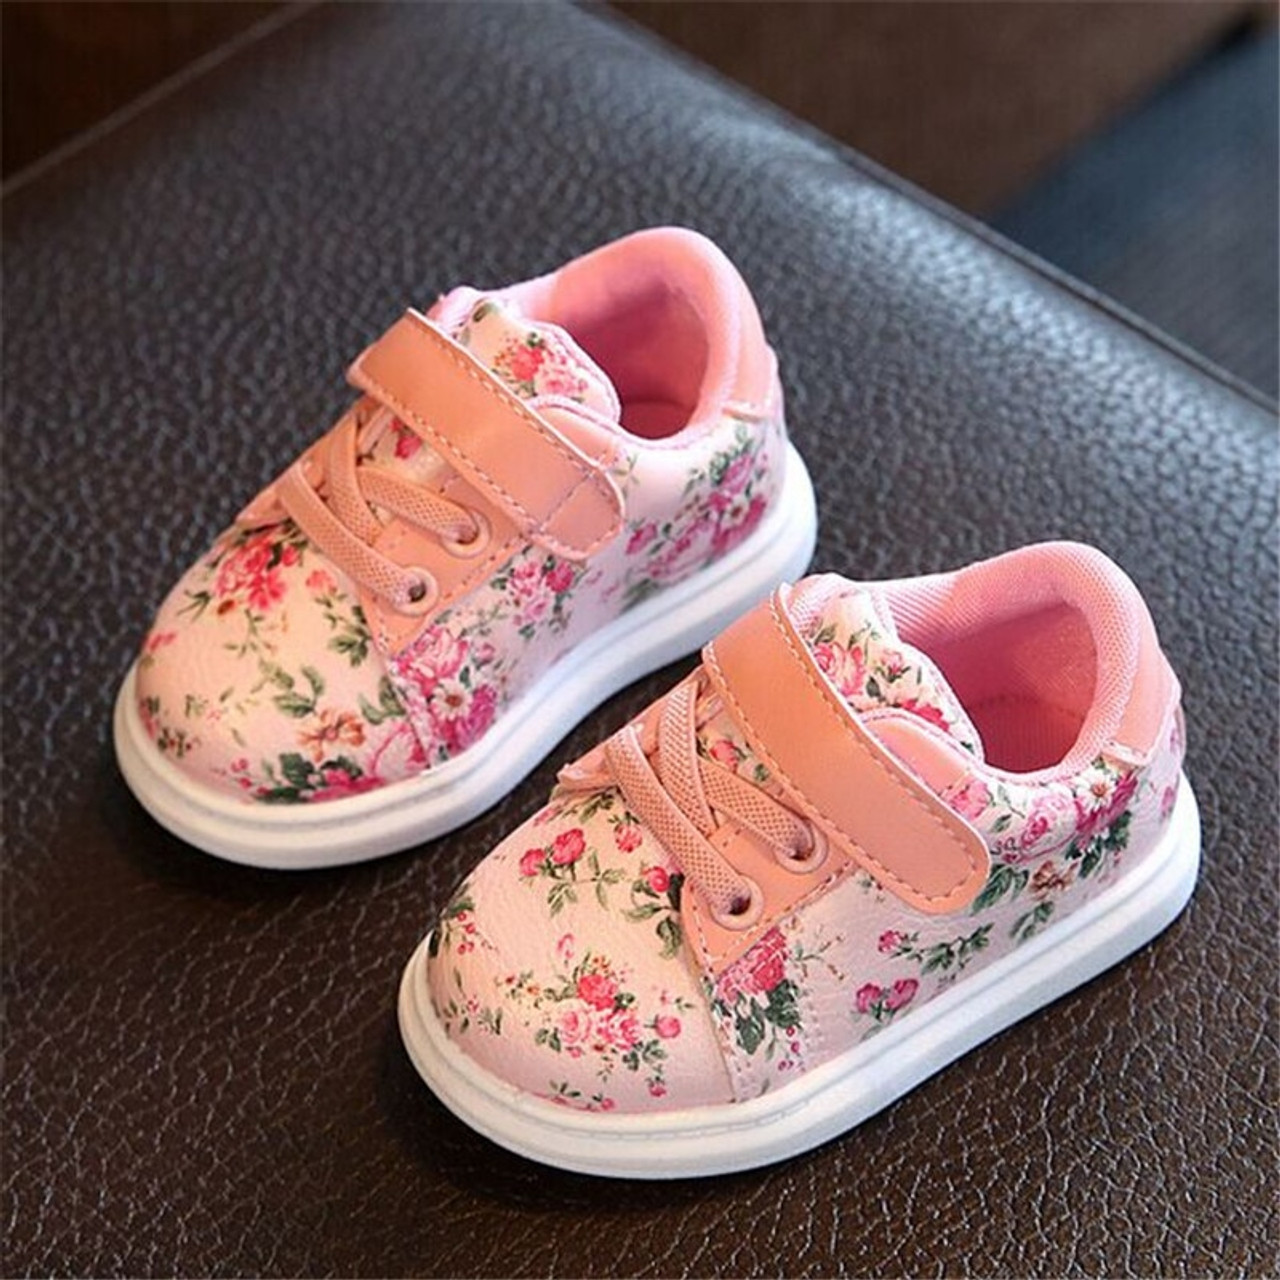 DIMI 2018 Cute Flower Baby Girls Shoes 